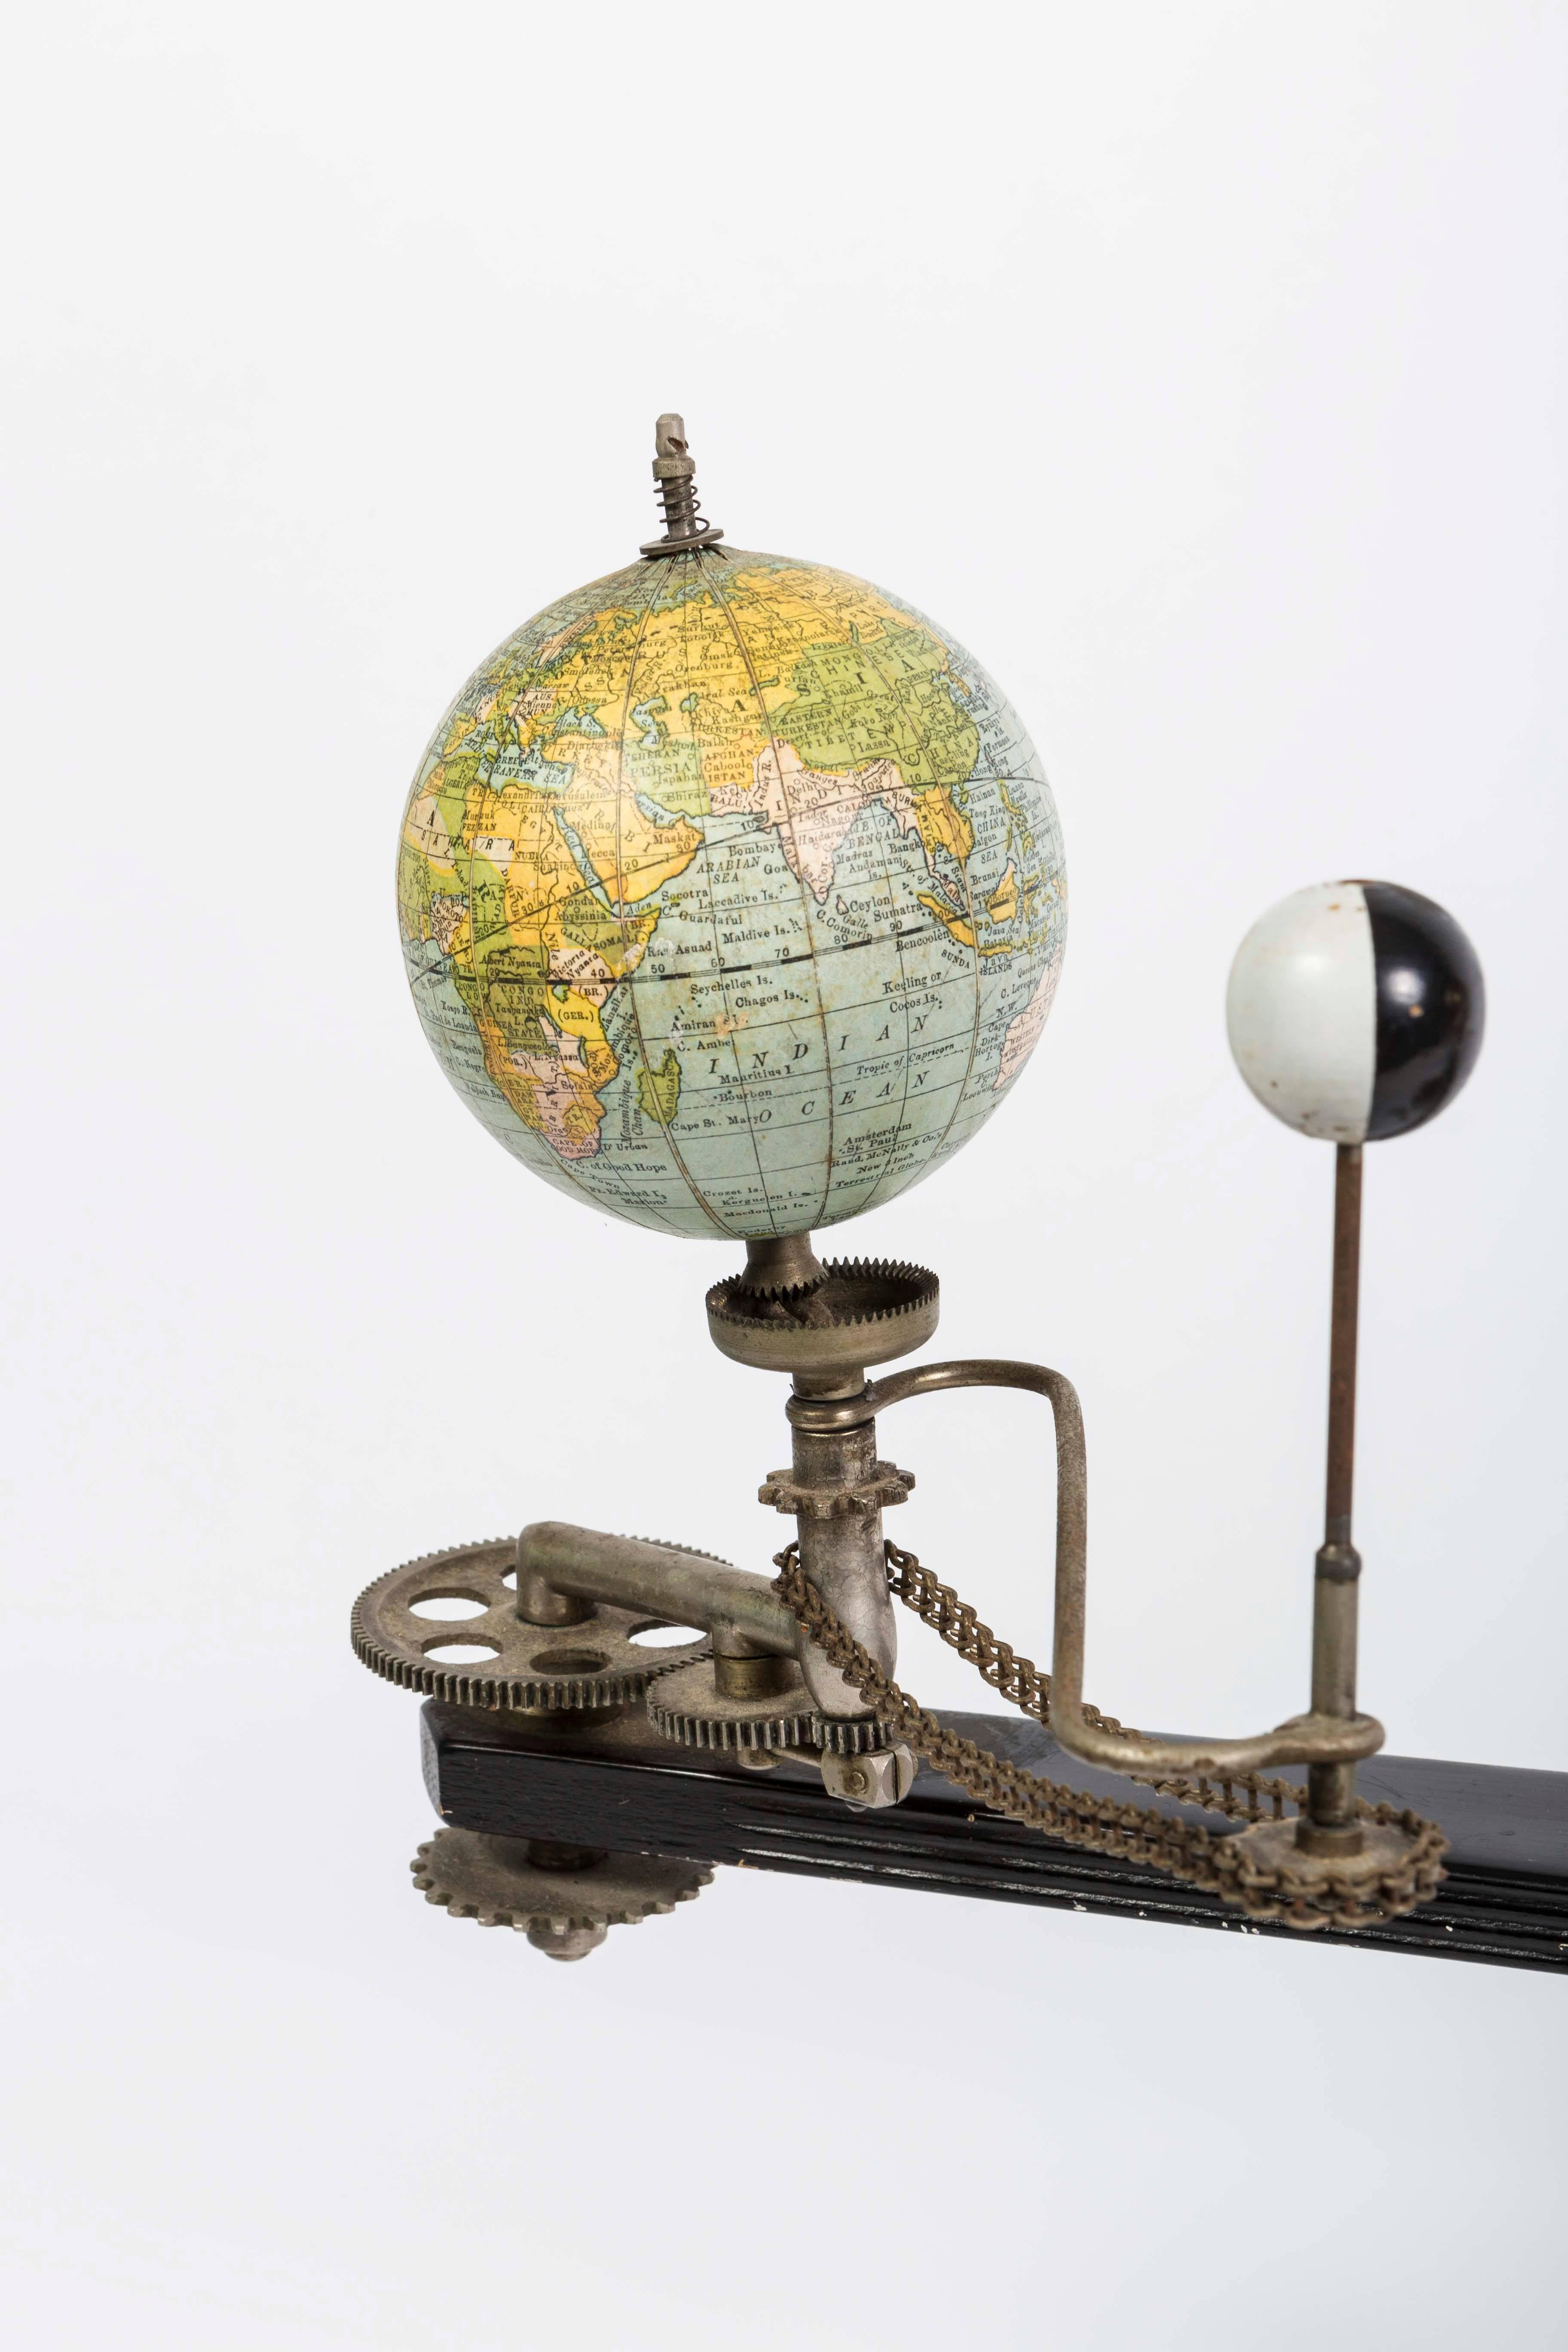 This scientific instrument from the 1900s was once an educational tool. Combining form and function at its best, this Trippensee orrery is pleasing to the eye and fascinating to the inquisitive mind. The orrery is a mechanical model of the solar